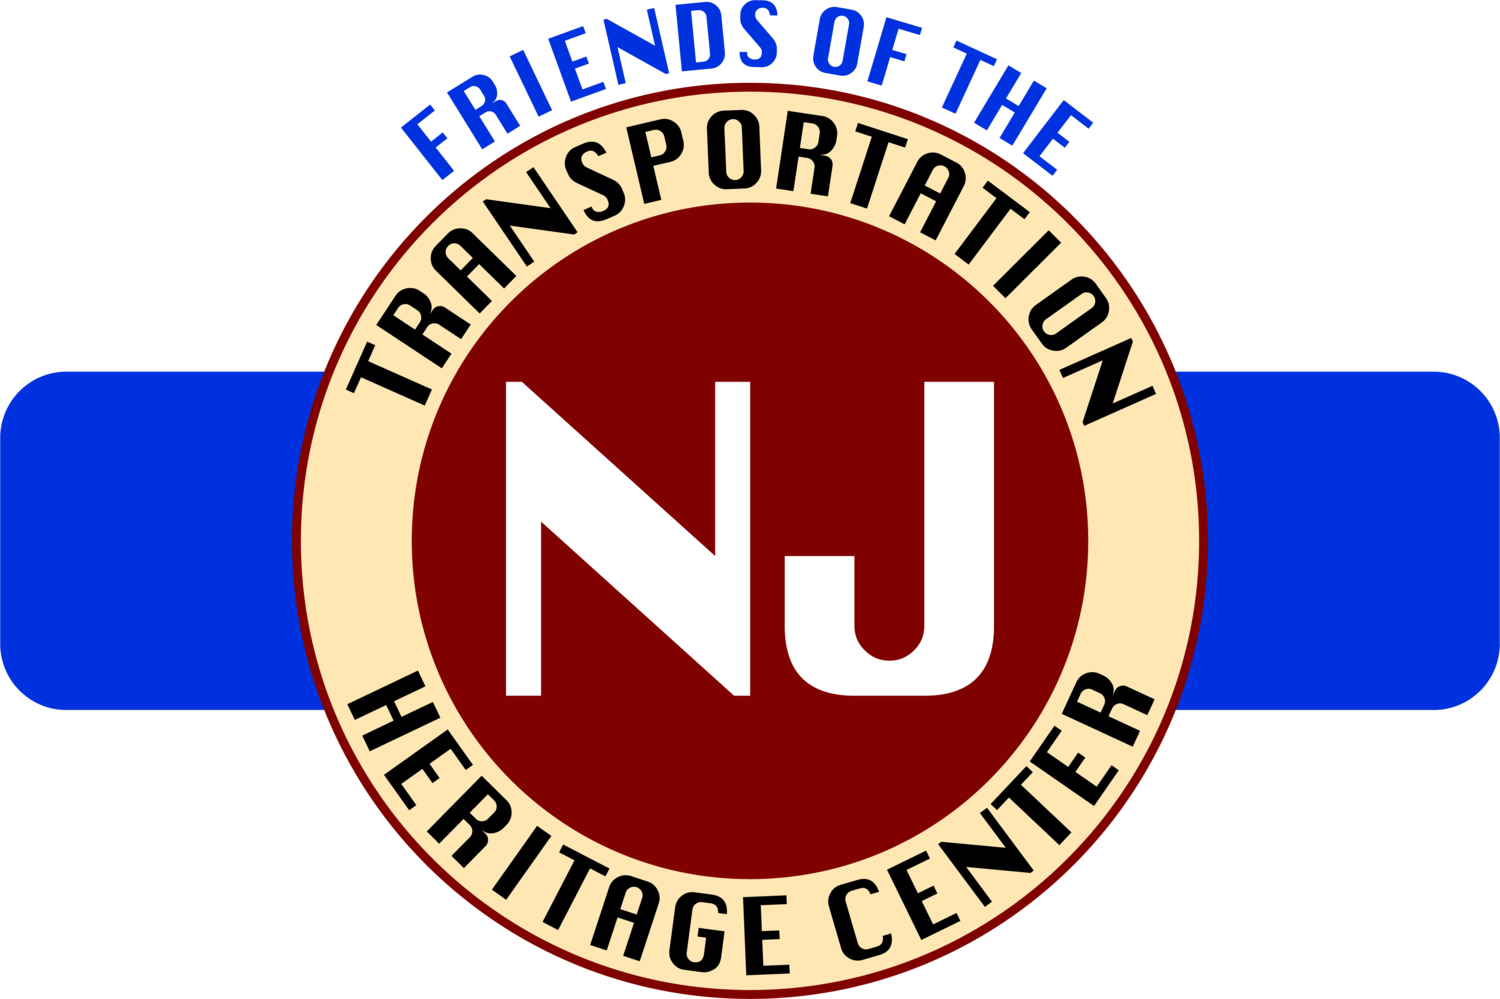 Friends of the New Jersey Transportation Heritage Center